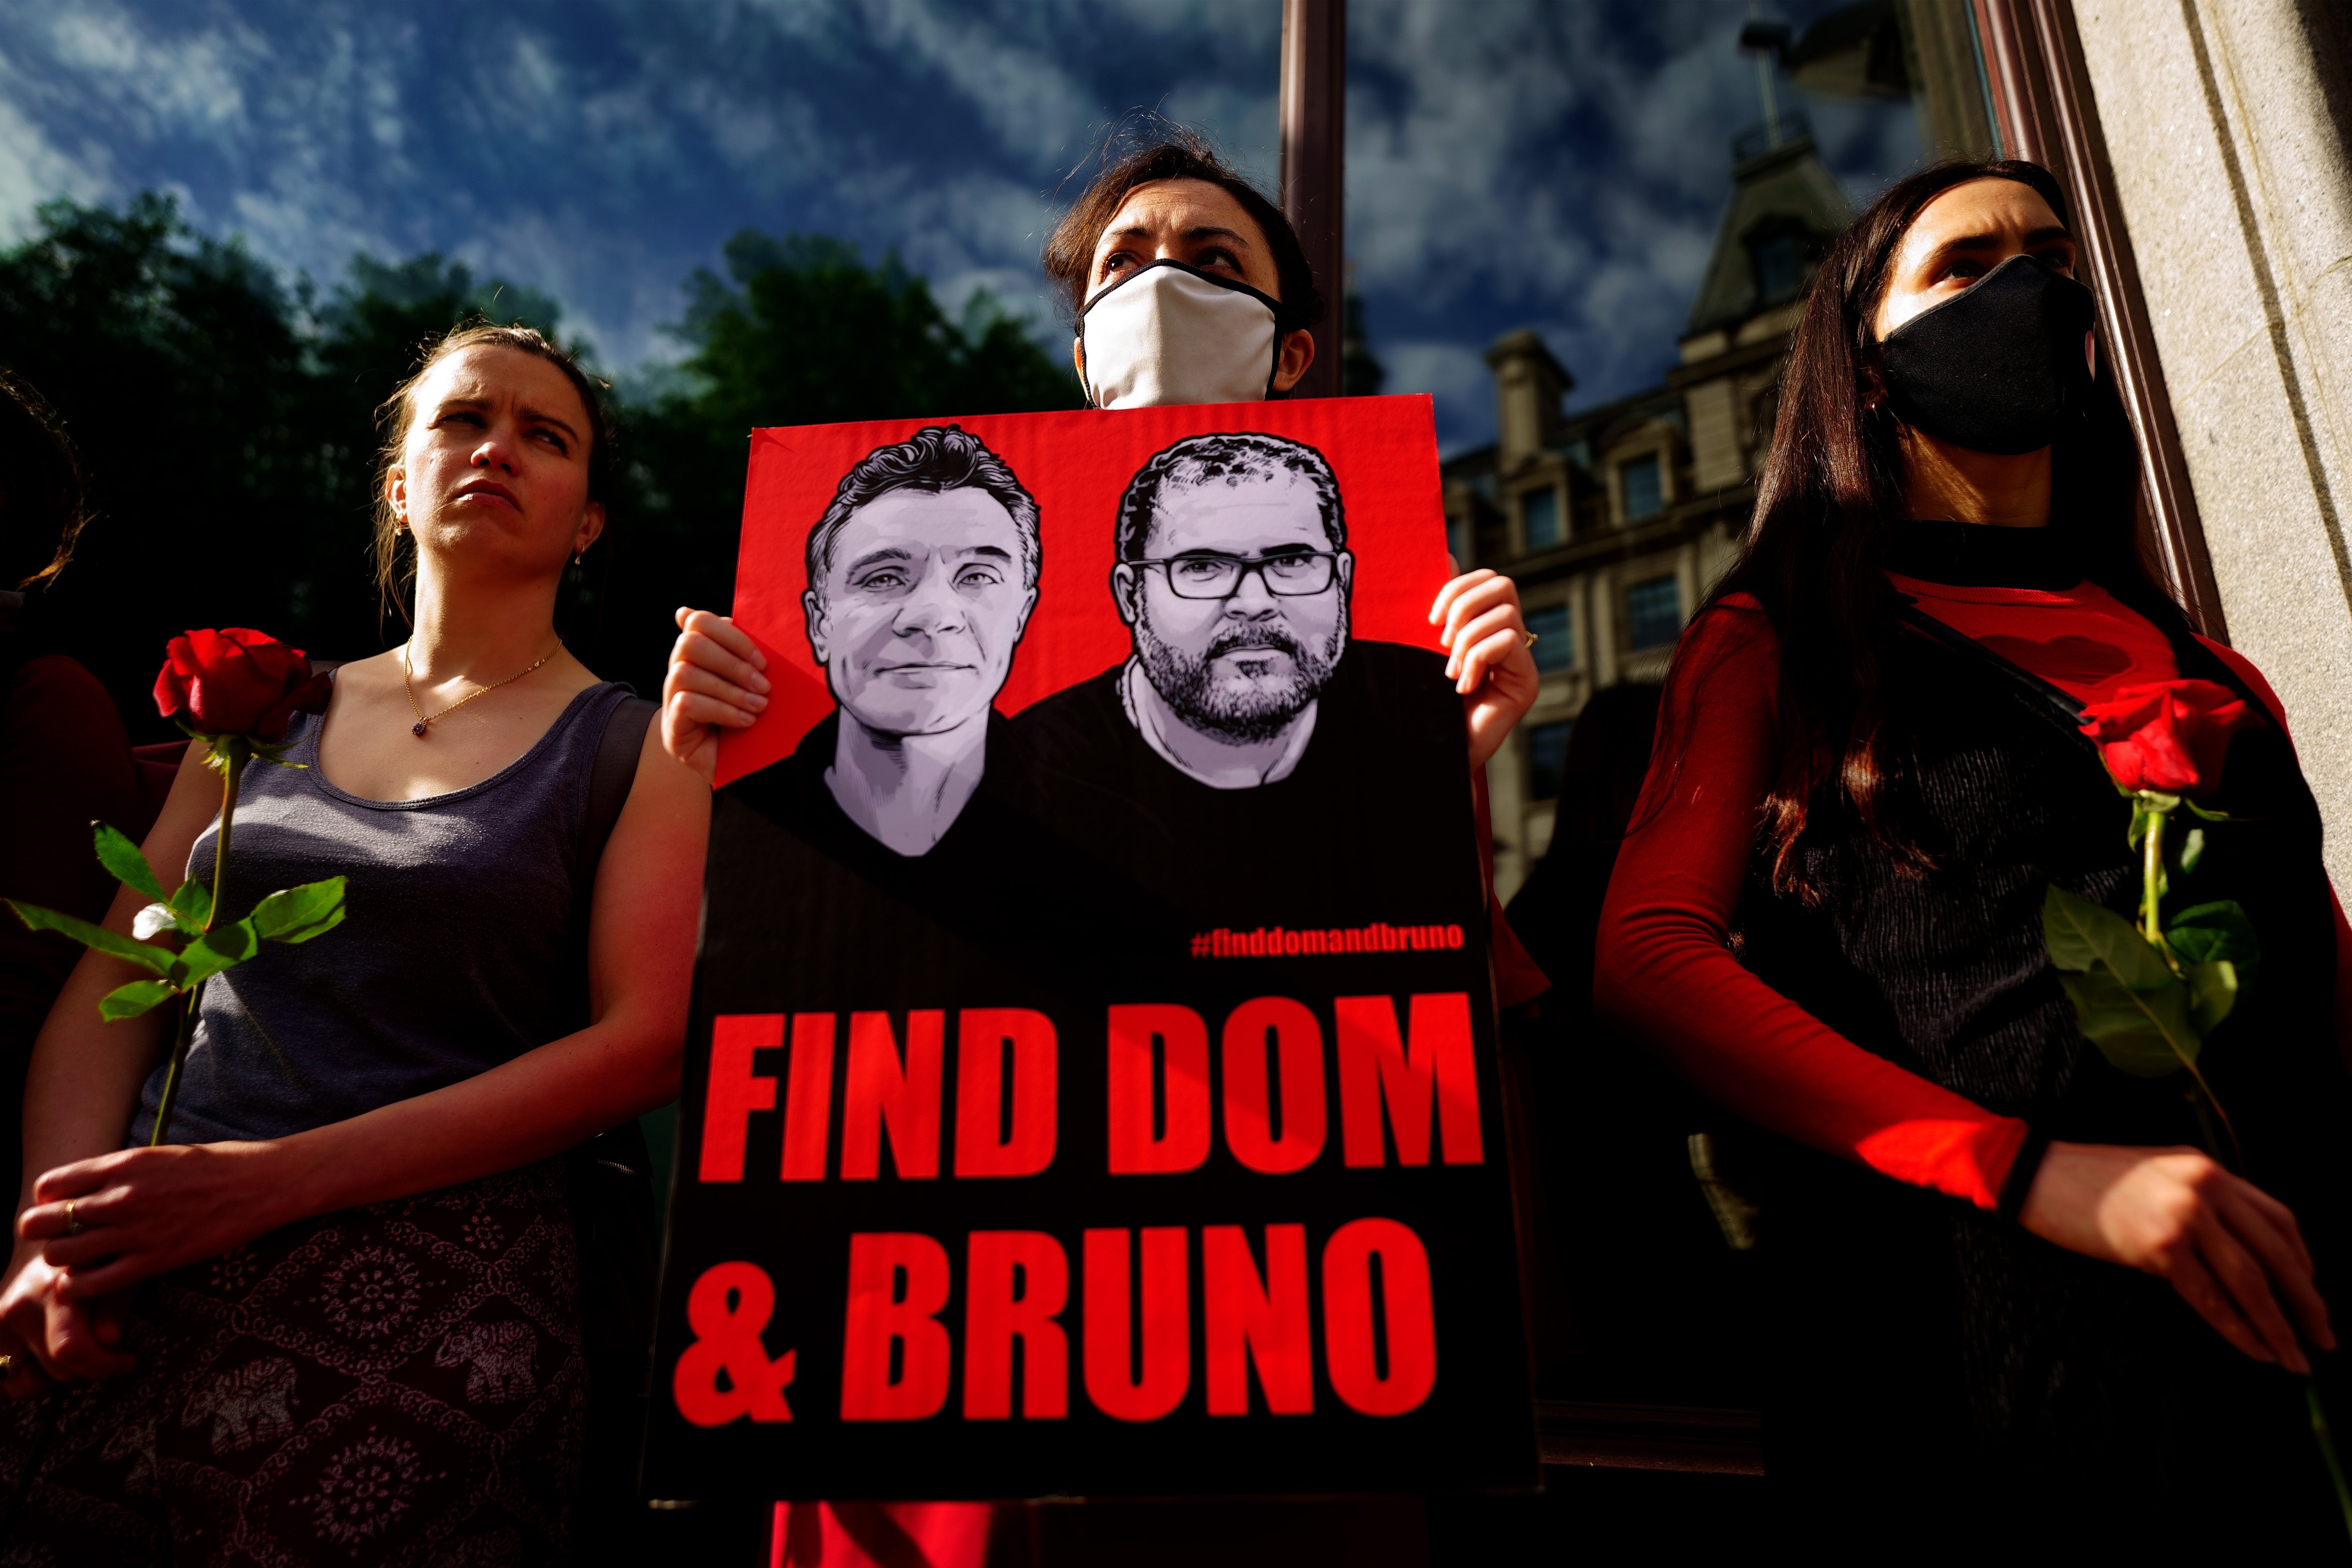 Supporters in the UK had called for greater efforts to find the pair (Victoria Jones/PA)